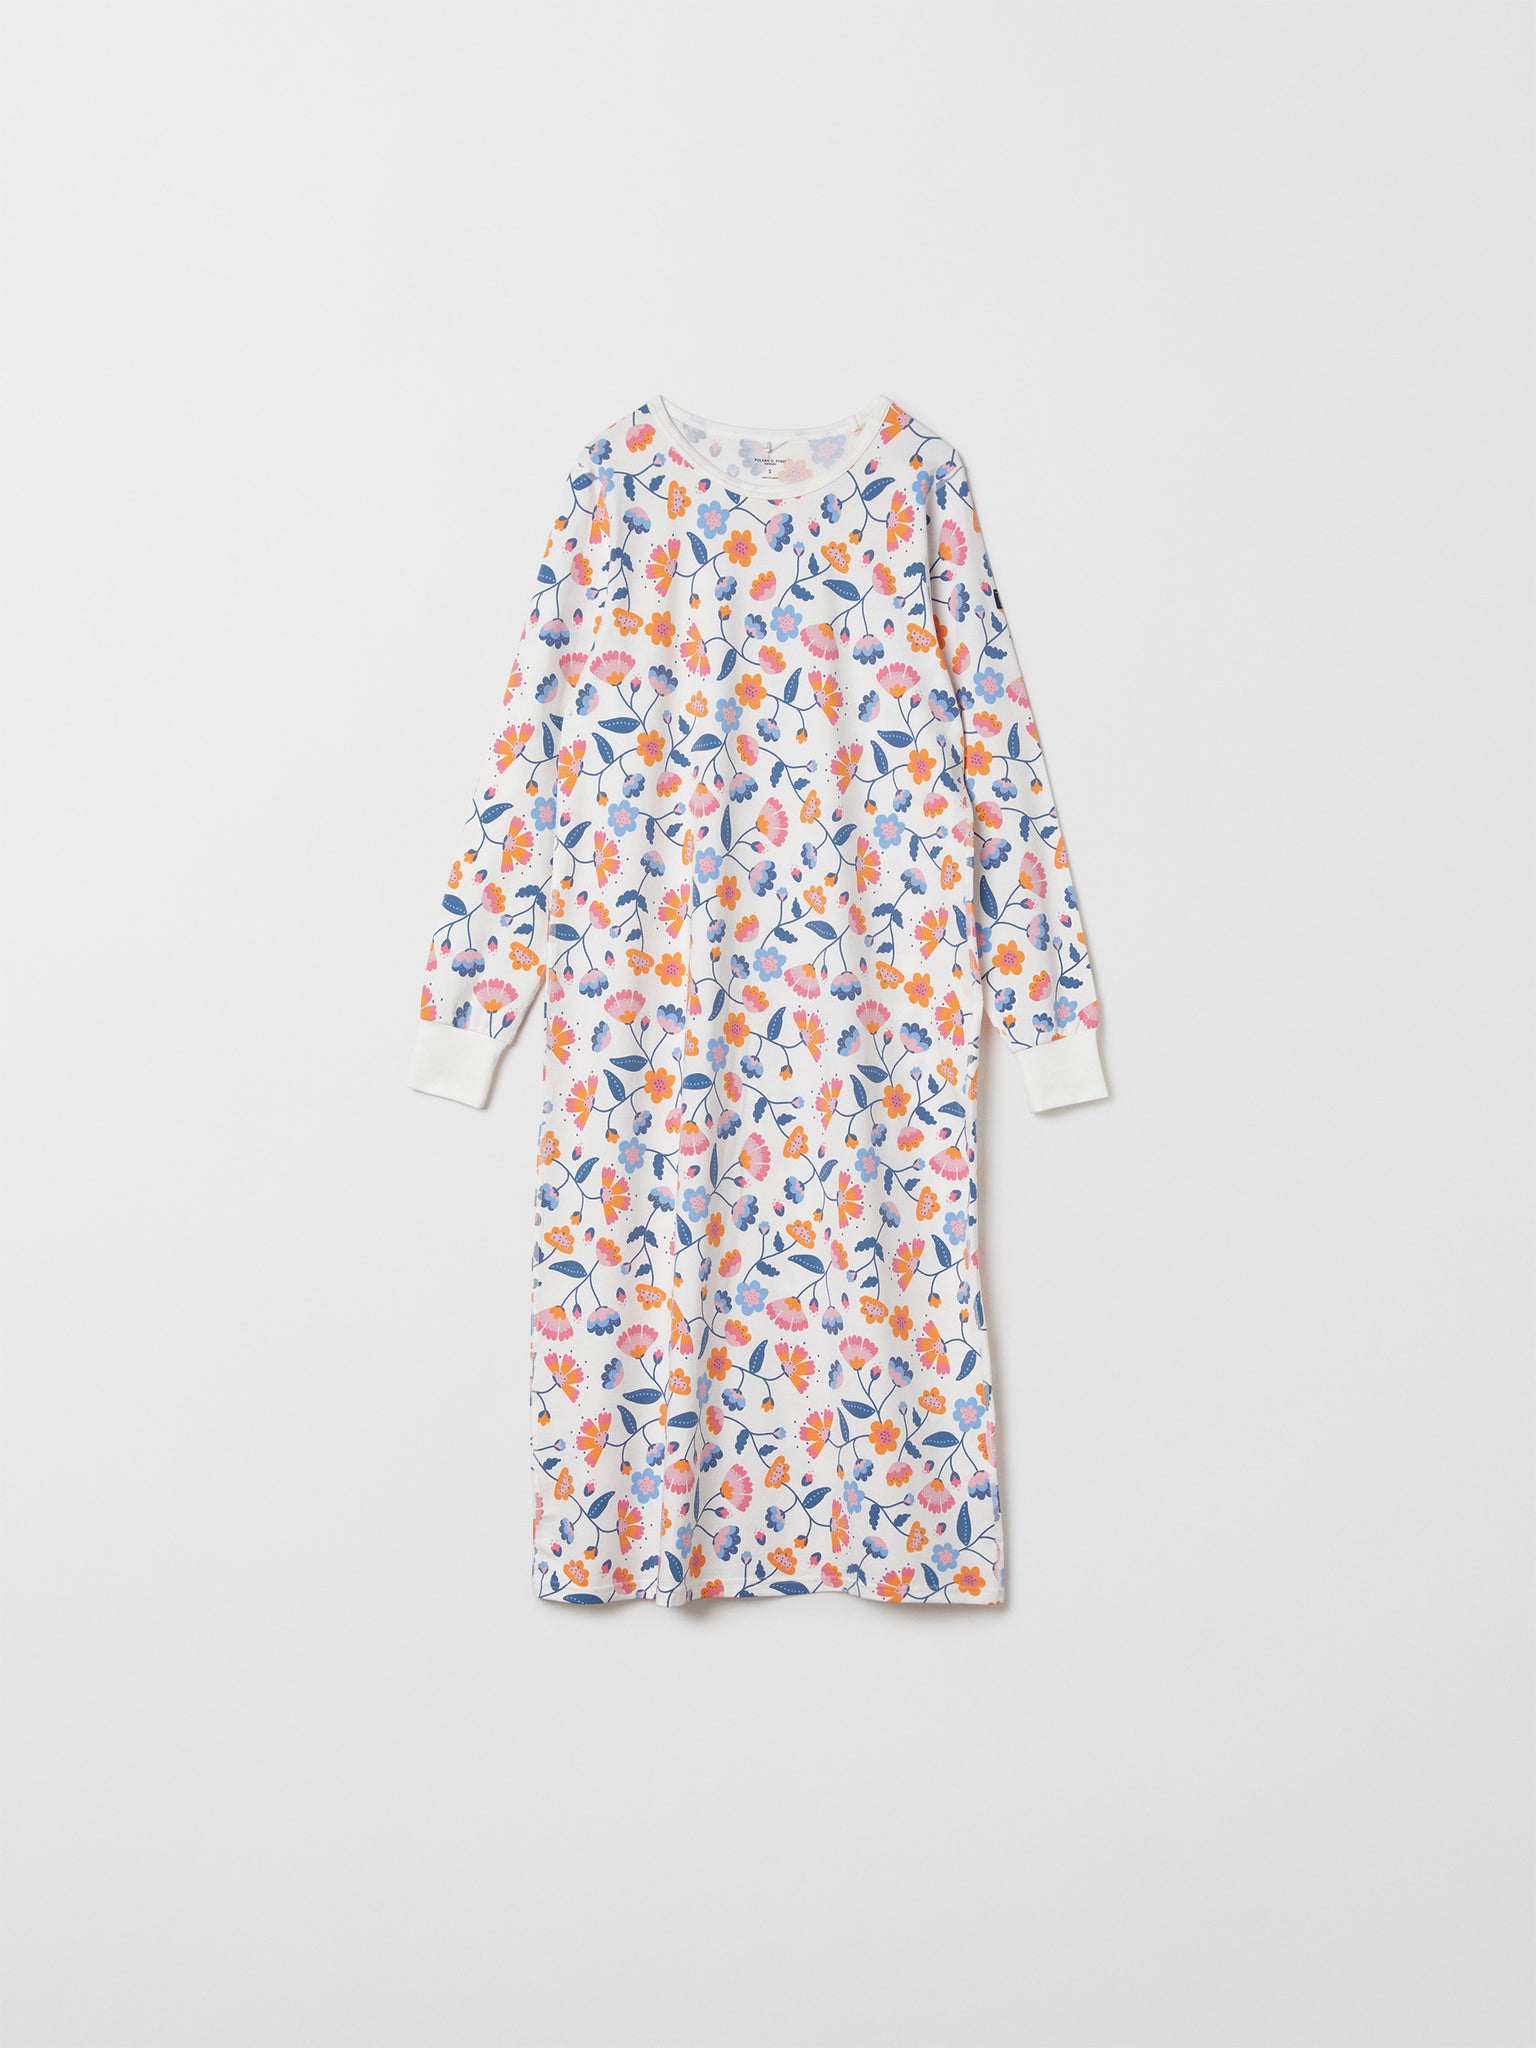 Floral Print Adult Nightdress S / S